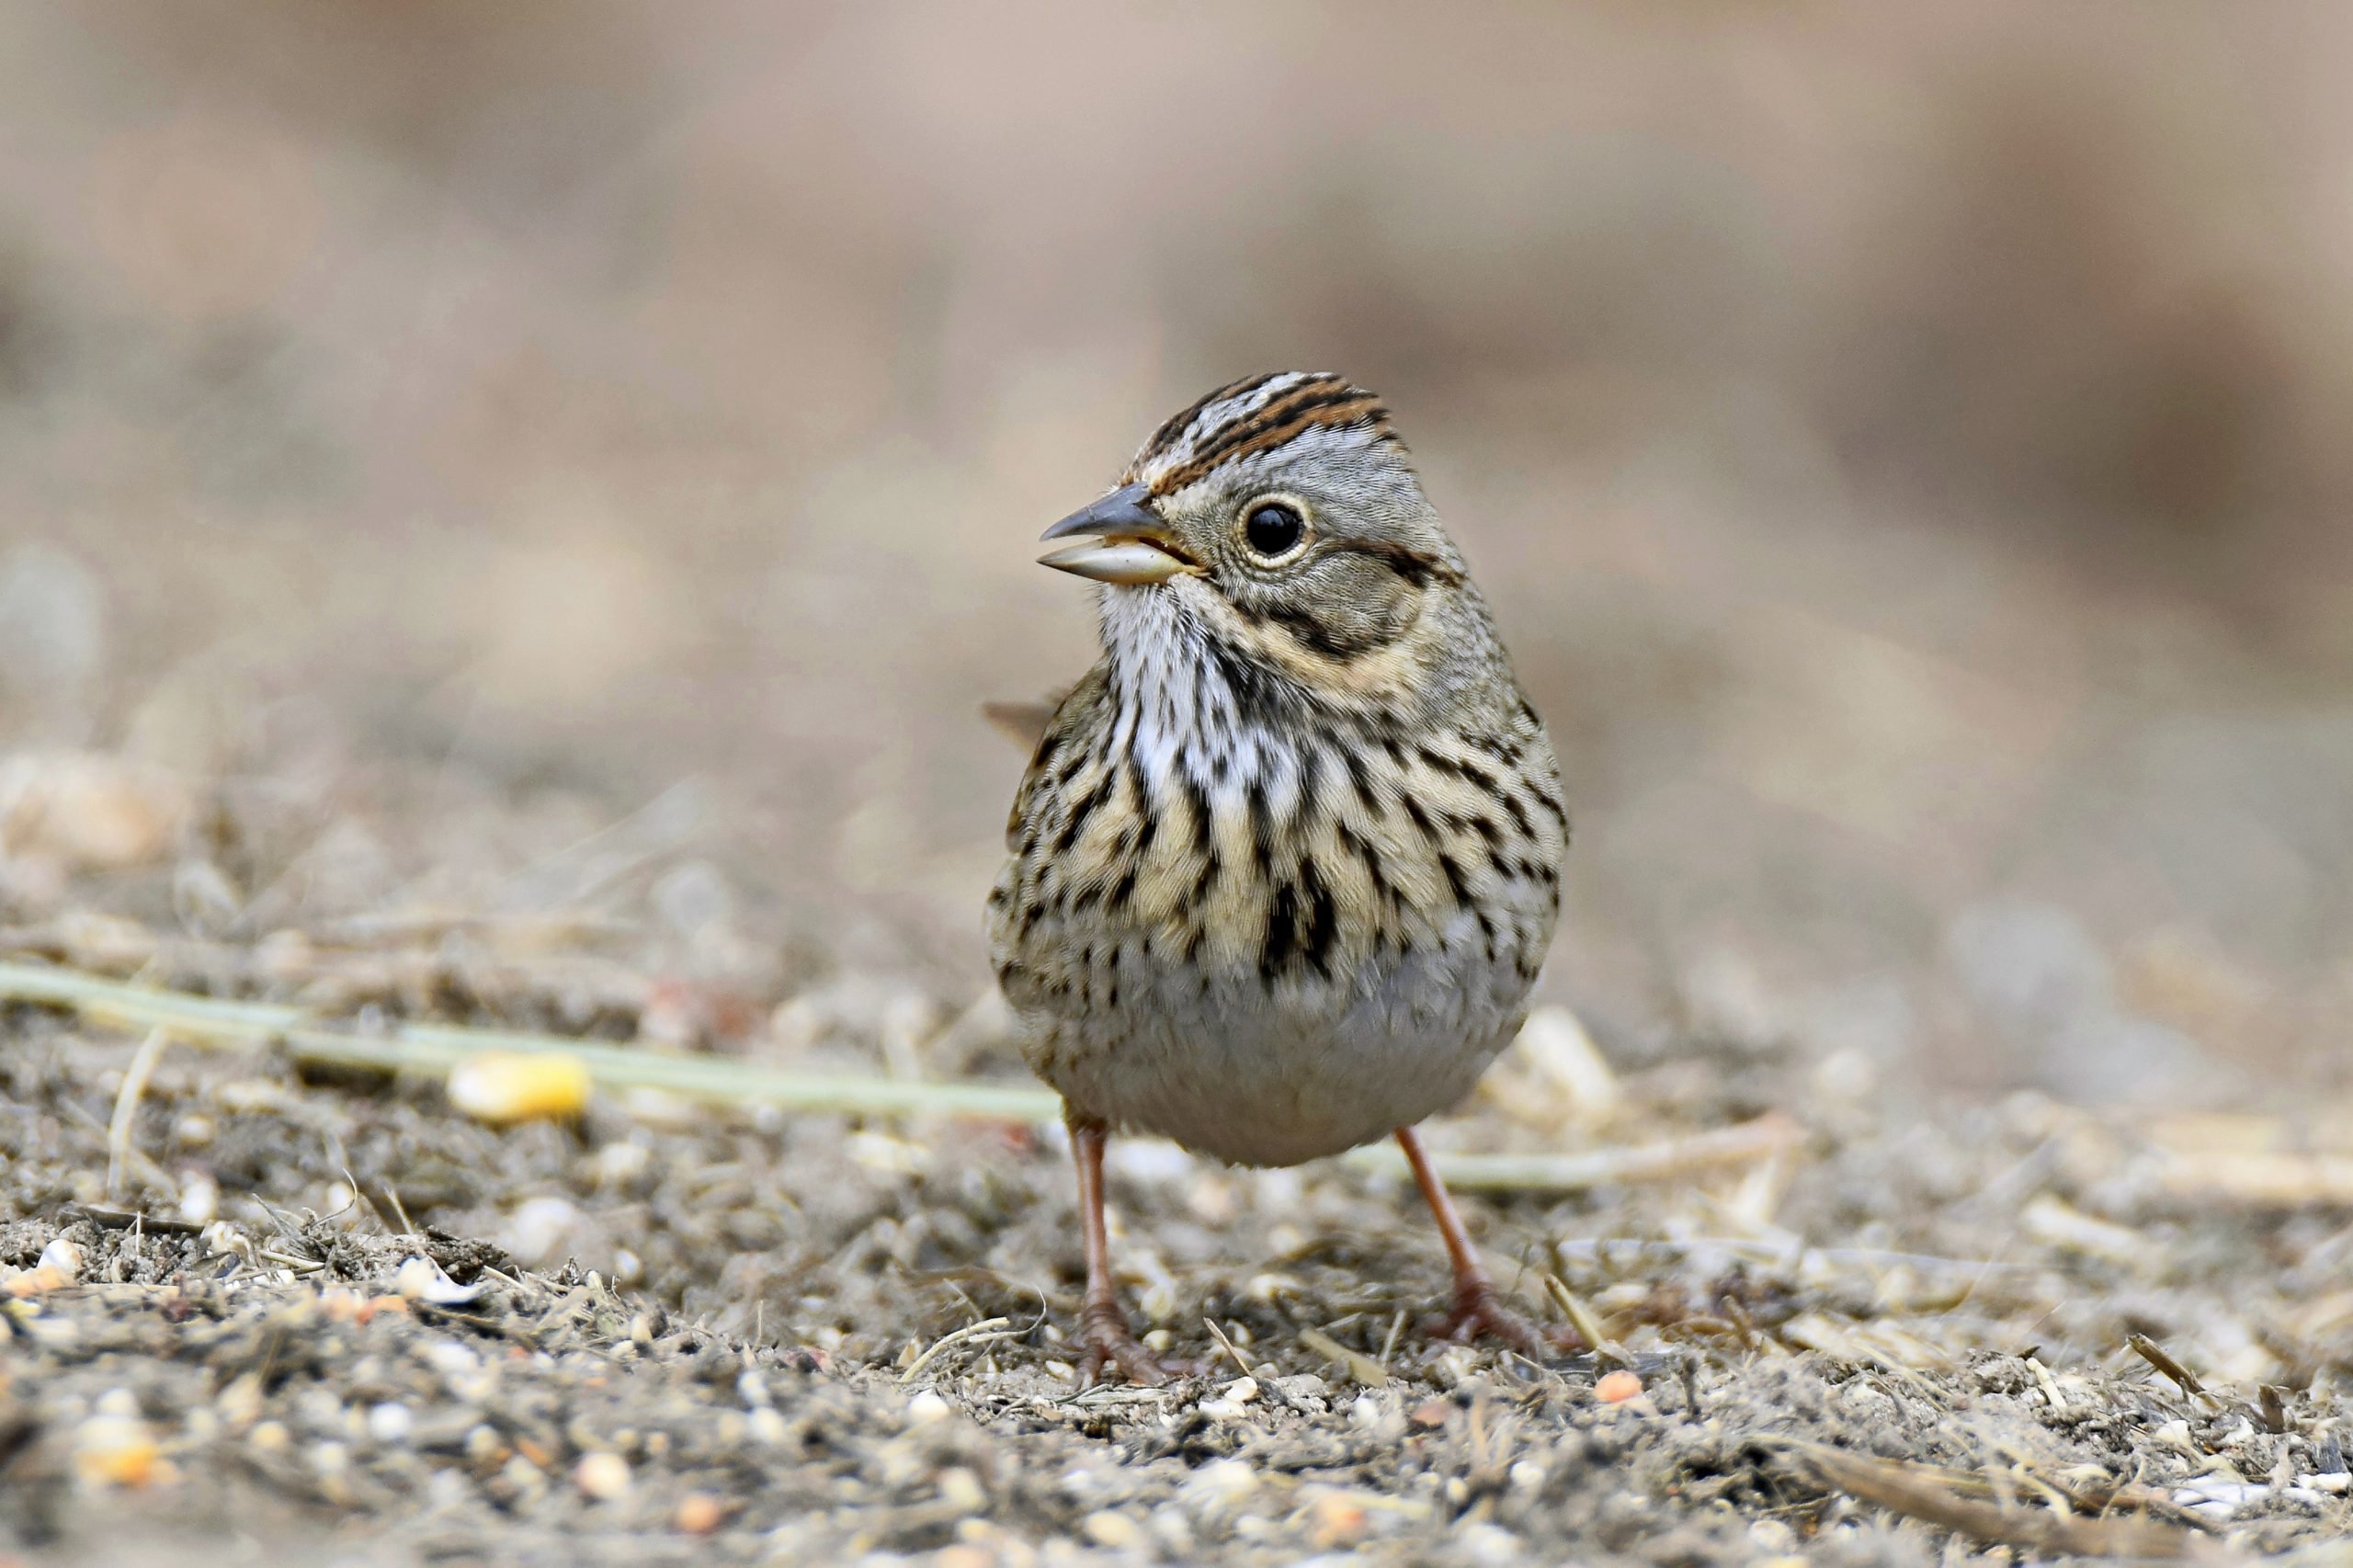 A striped Lincolns sparrow hops along the ground.